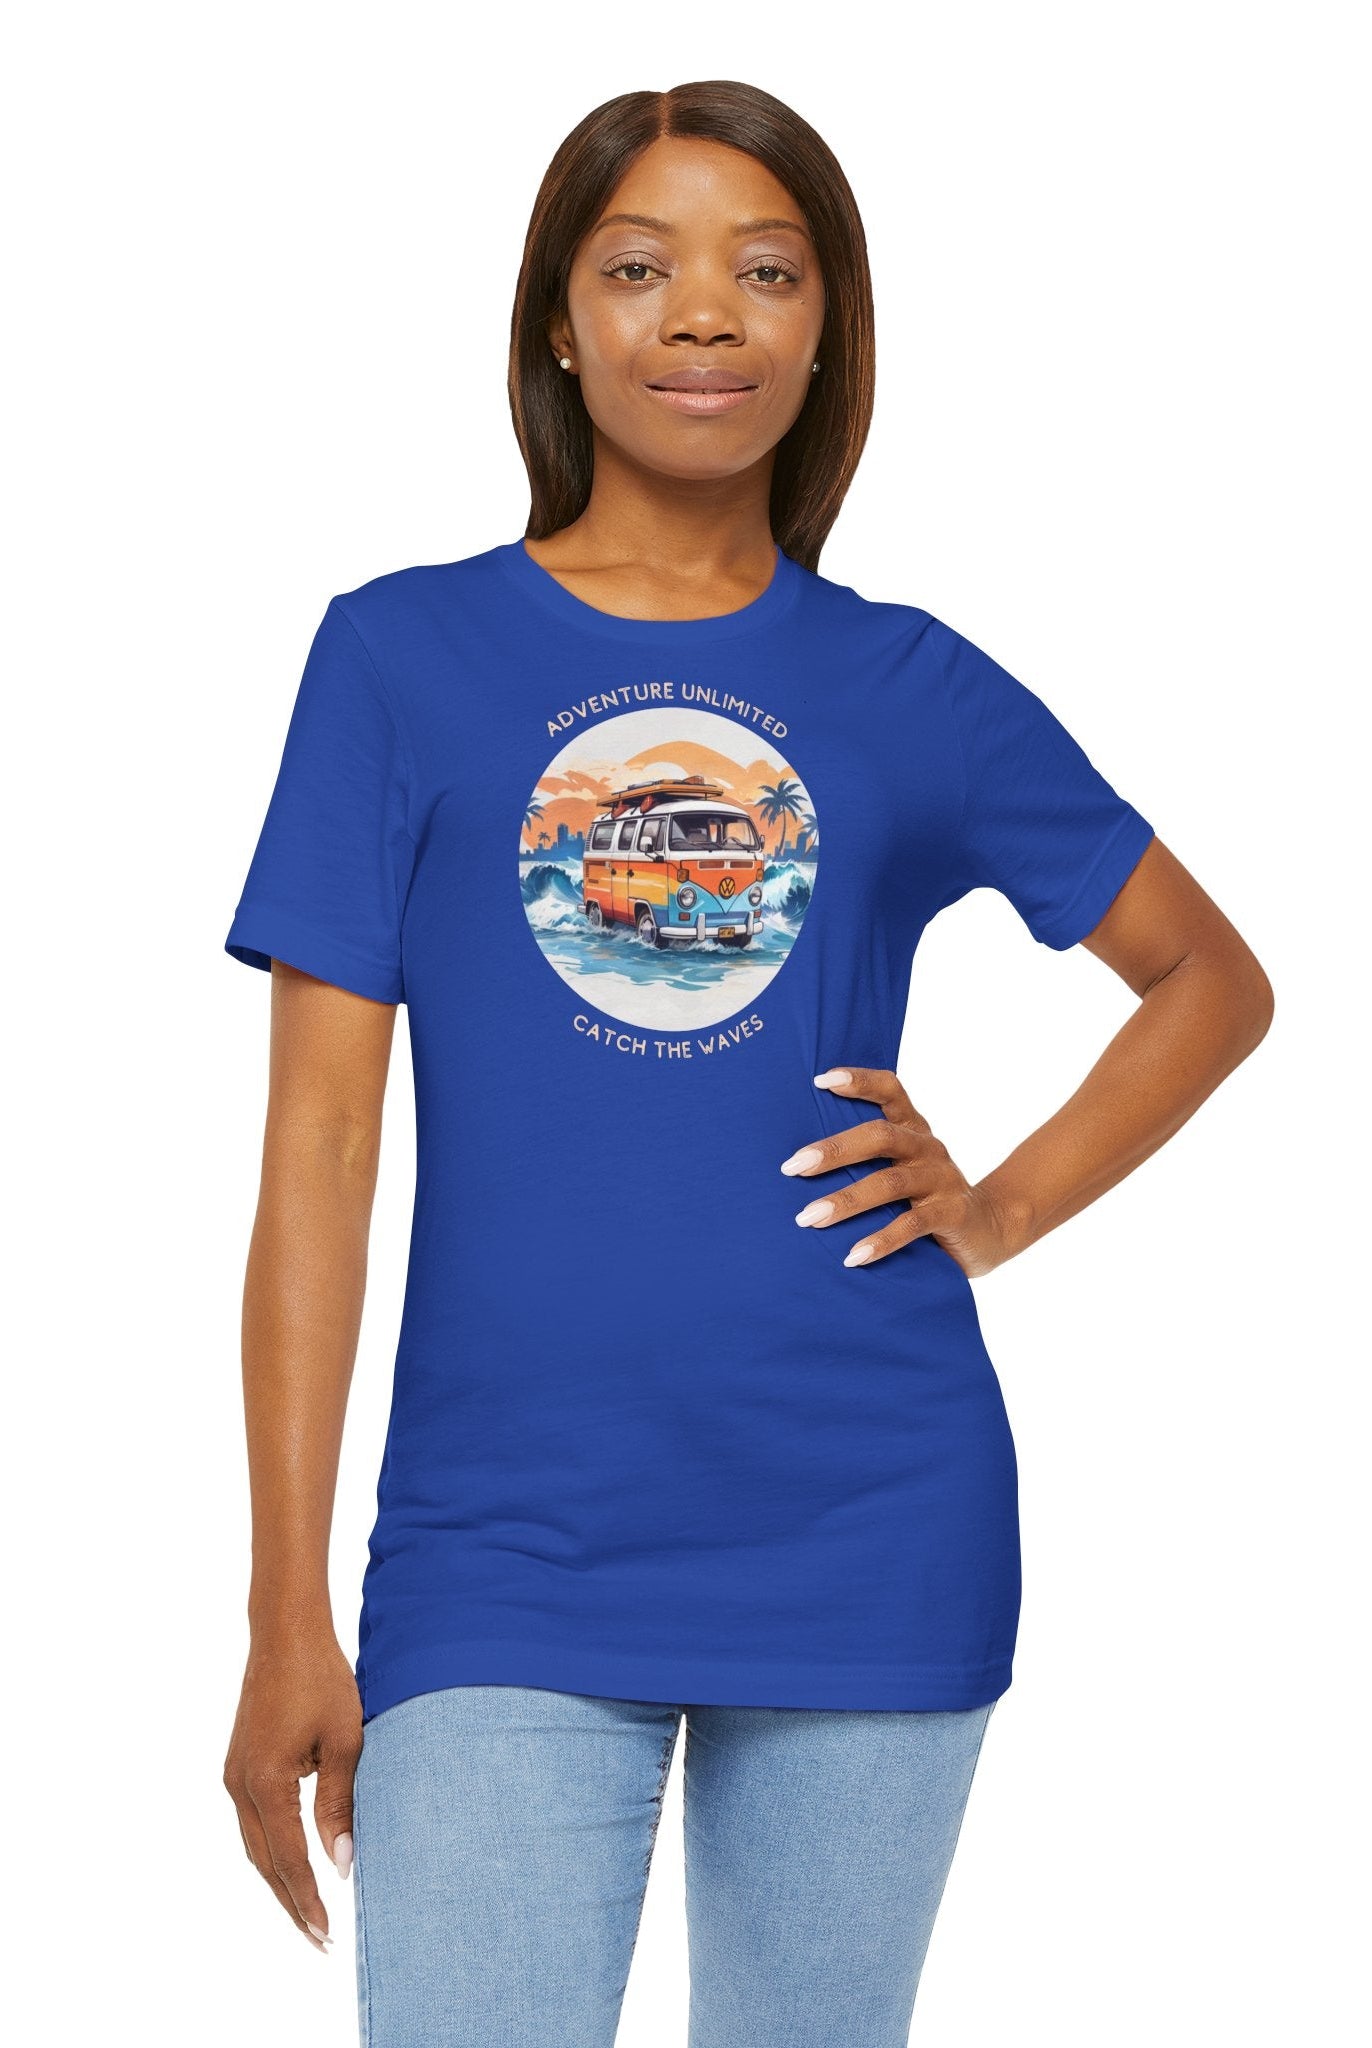 Adventure Unlimited Surfing T-Shirt by Soulshinecreators - Woman in Blue Printed T-Shirt